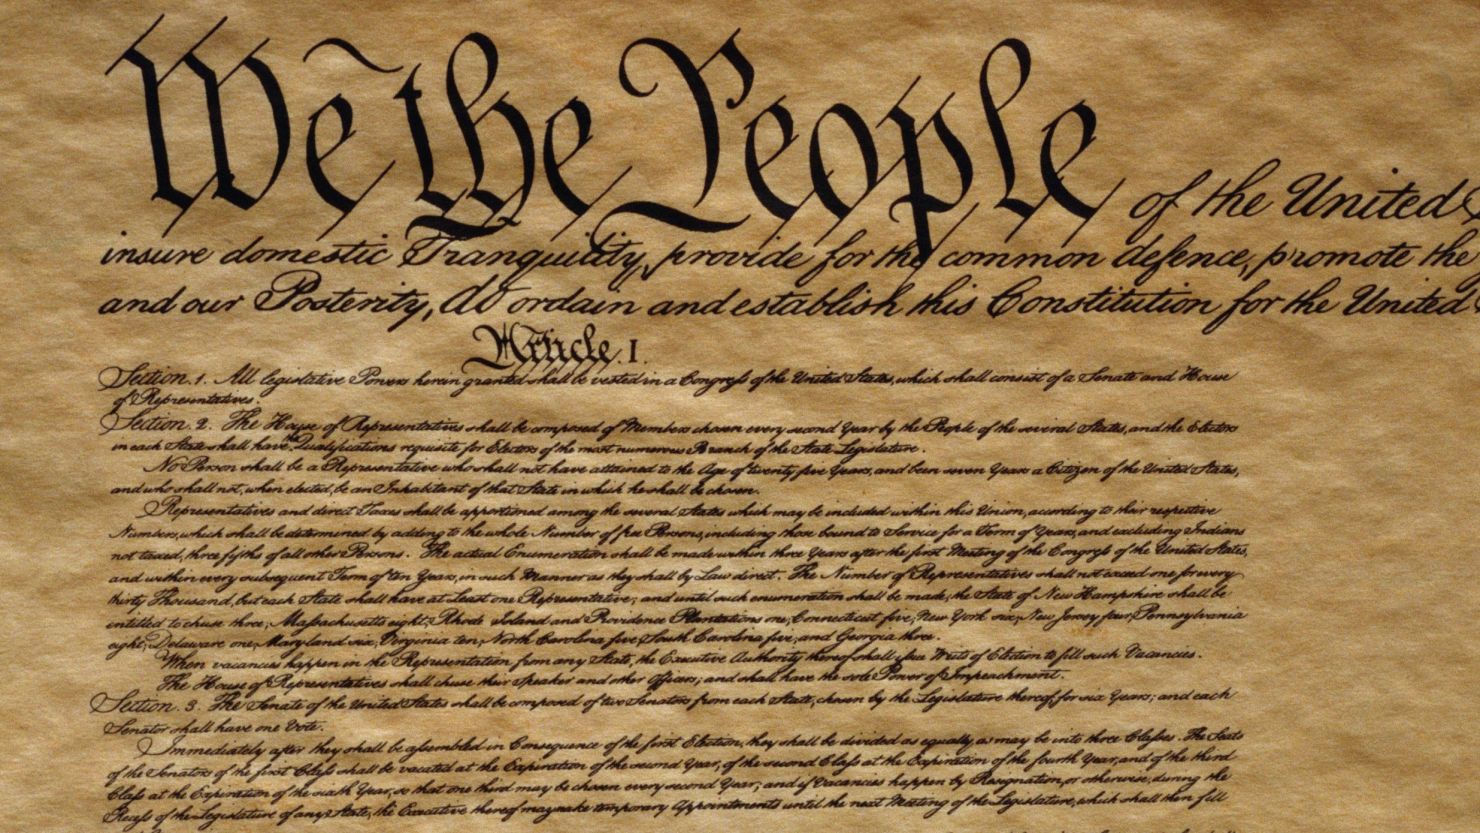 The United States - The United States Constitution